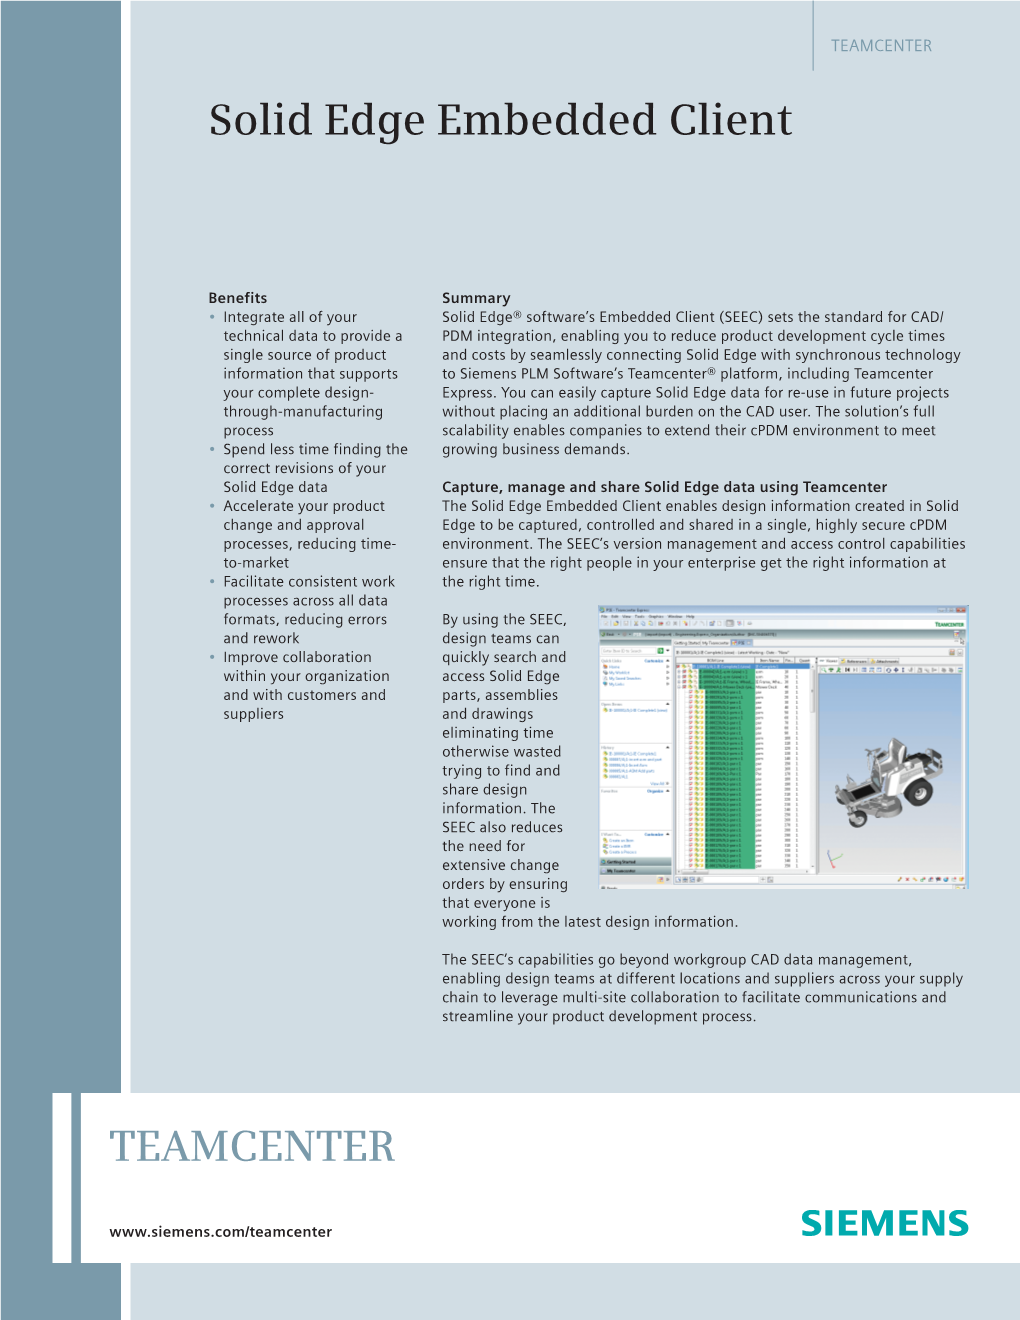 Teamcenter Solid Edge Embedded Client Fact Sheet